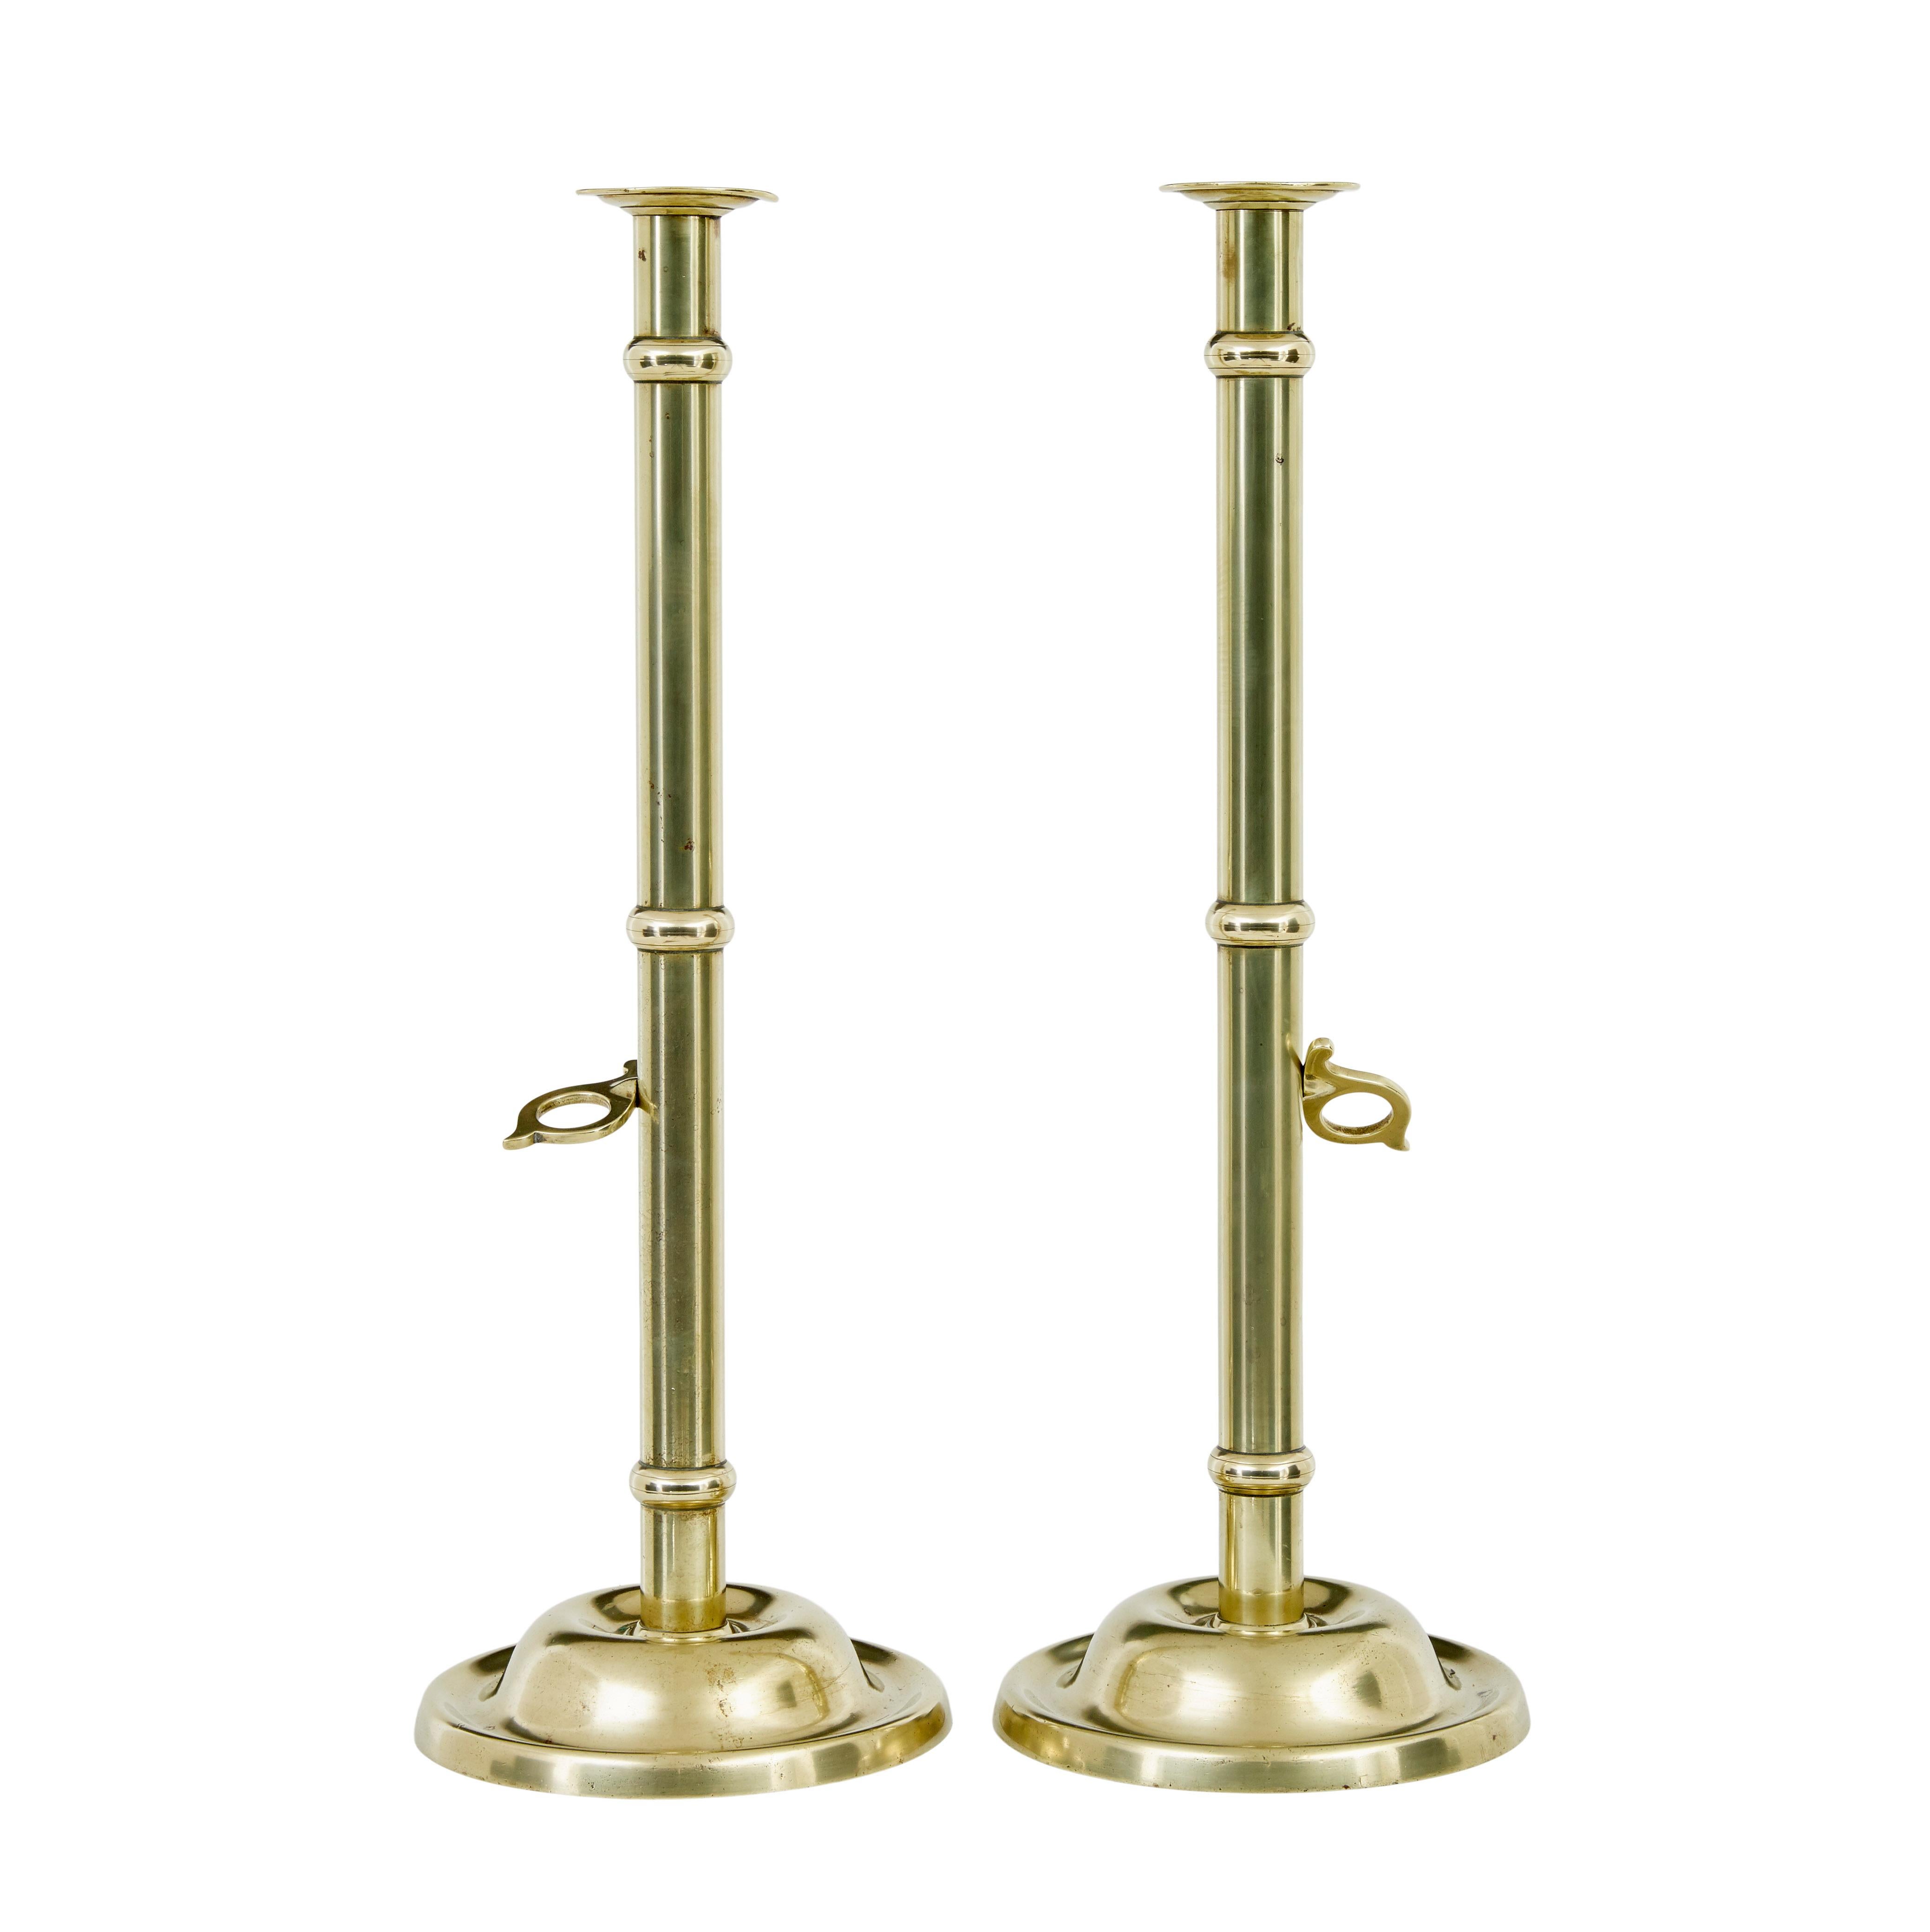 Pair of arts and crafts 19th century brass candlesticks circa 1890.

Good quality pair of tall table or fireside candlesticks made in solid brass.  Elegant pair with the added feature of a sliding trigger which allows the candle to be lifted when